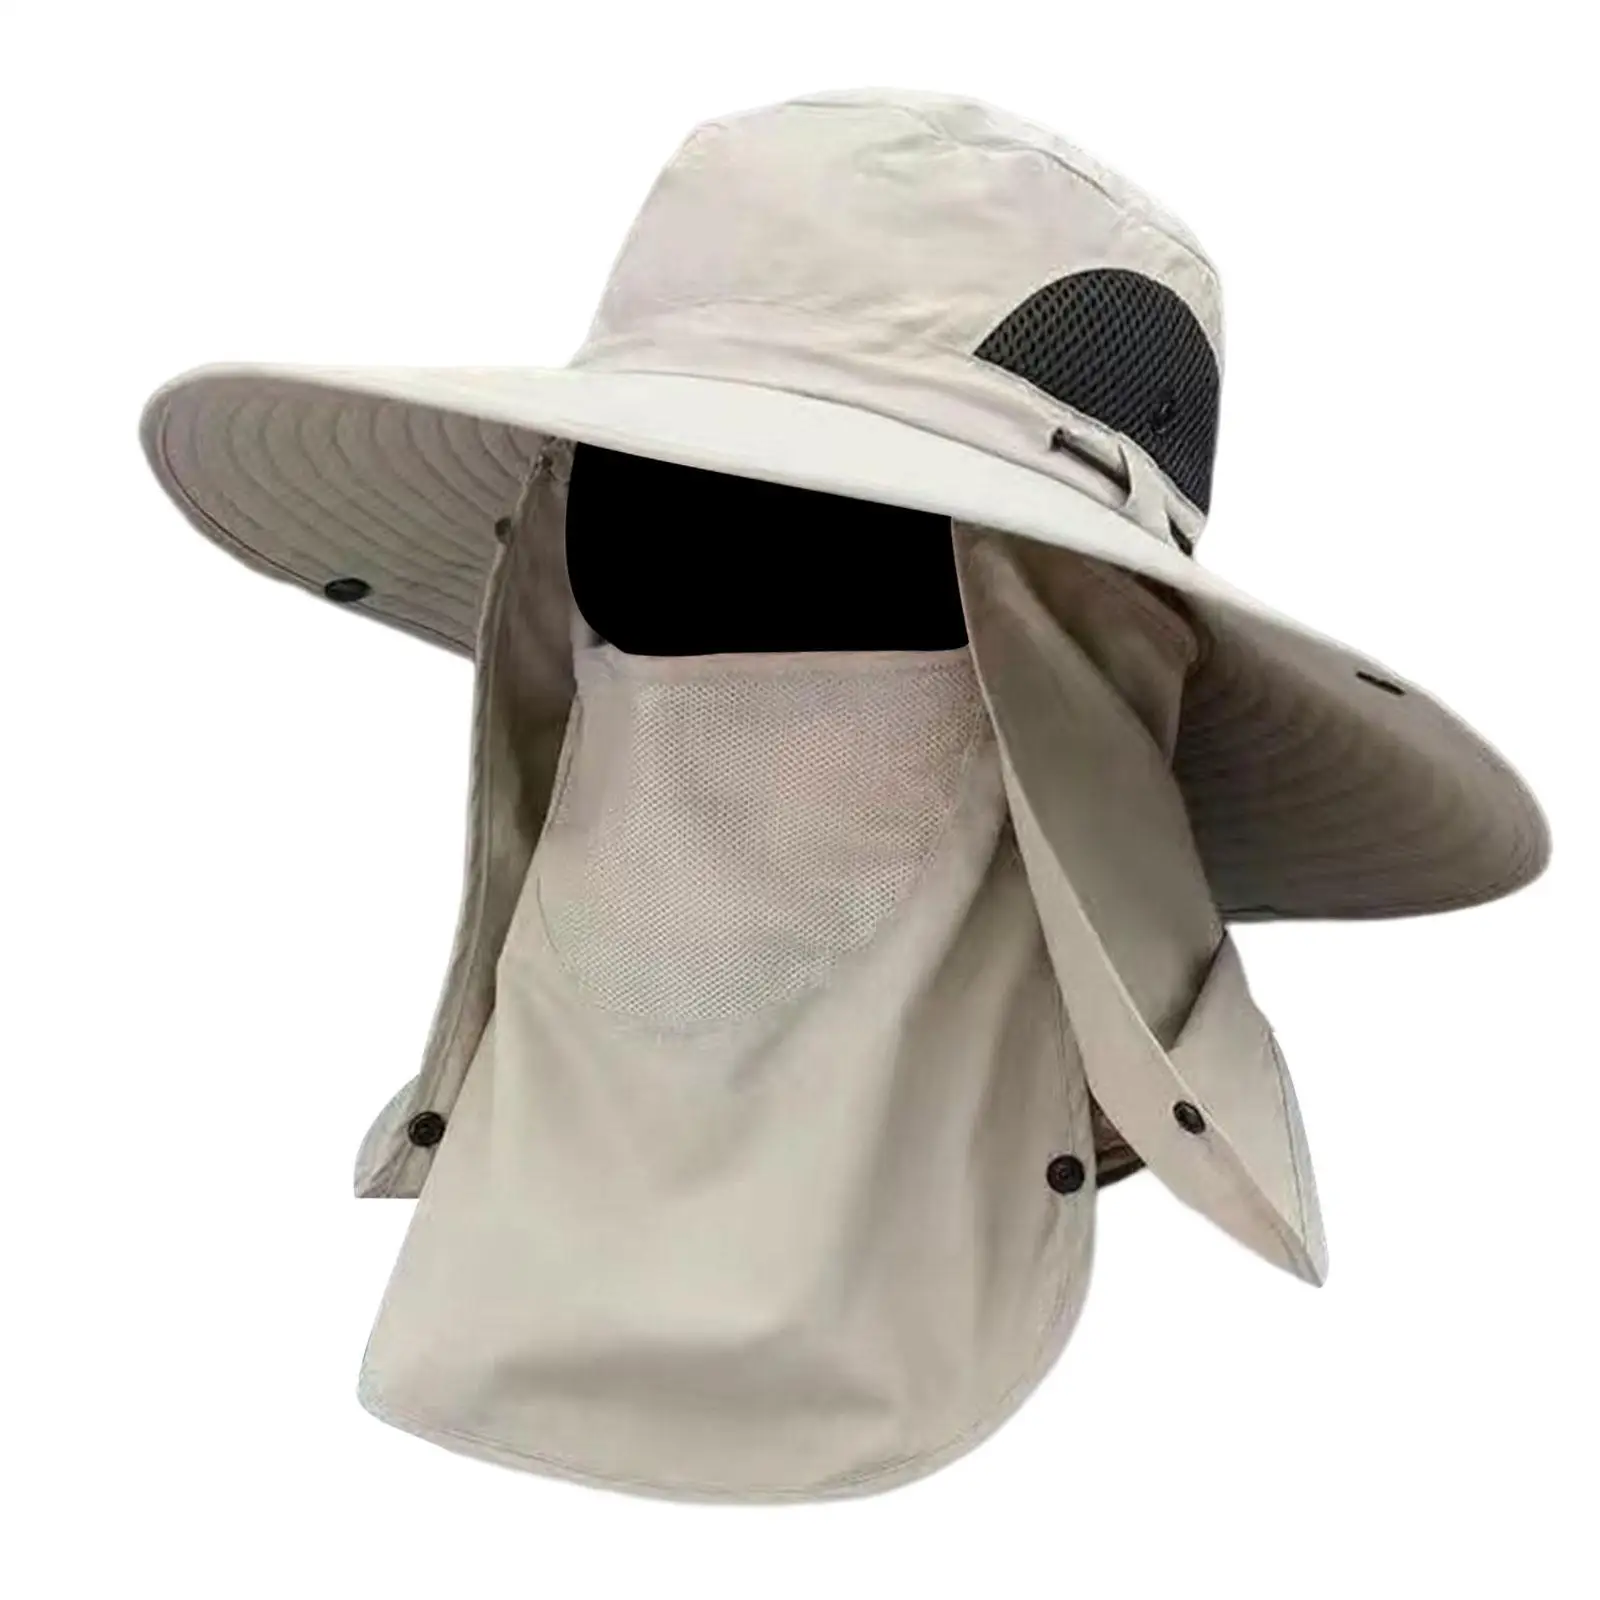 Fishing Hat Windproof Strap Outdoor Sun Cap with Detachable Face Neck Flap Cover for Gardening Women Men Climbing Backpacking